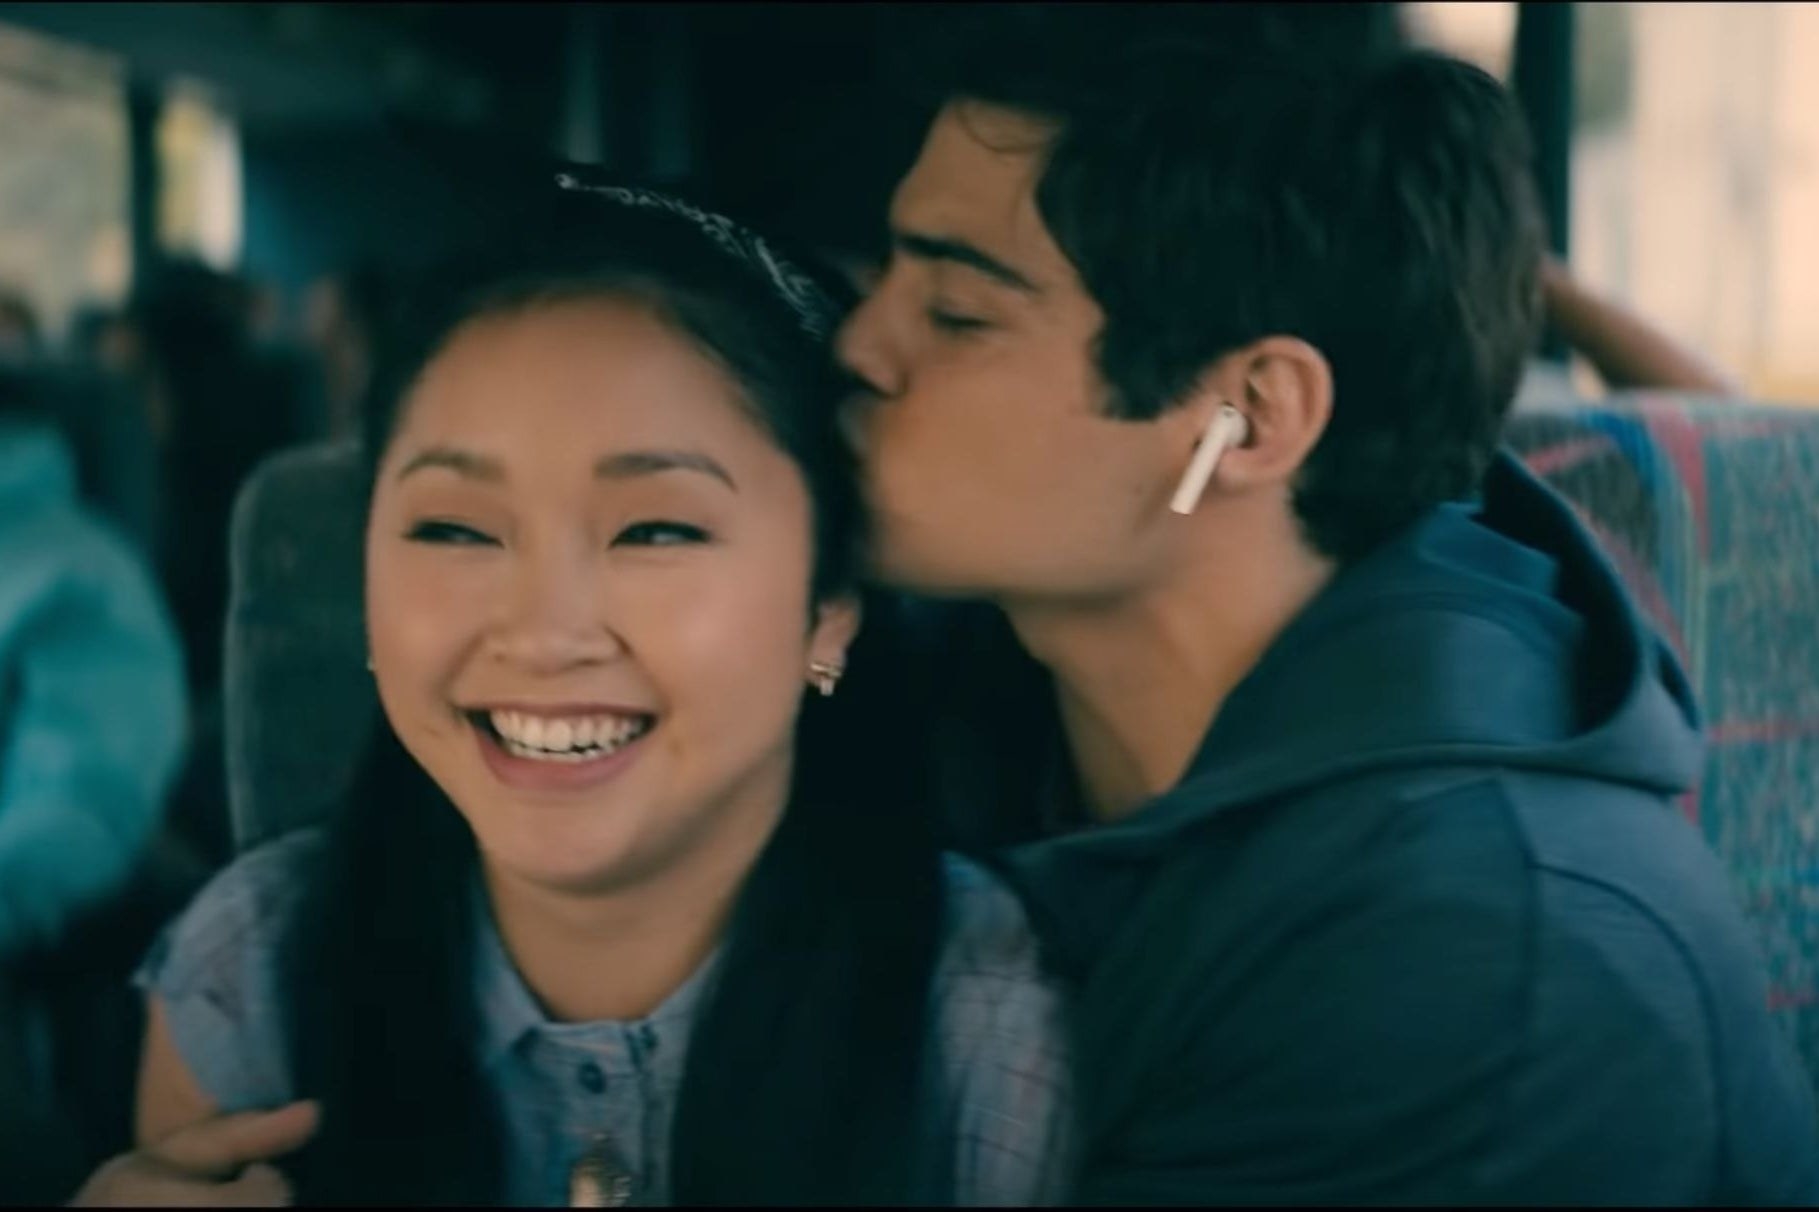 Peter kissing Lara from &quot;To All The Boys I&#x27;ve Loved Before&quot;